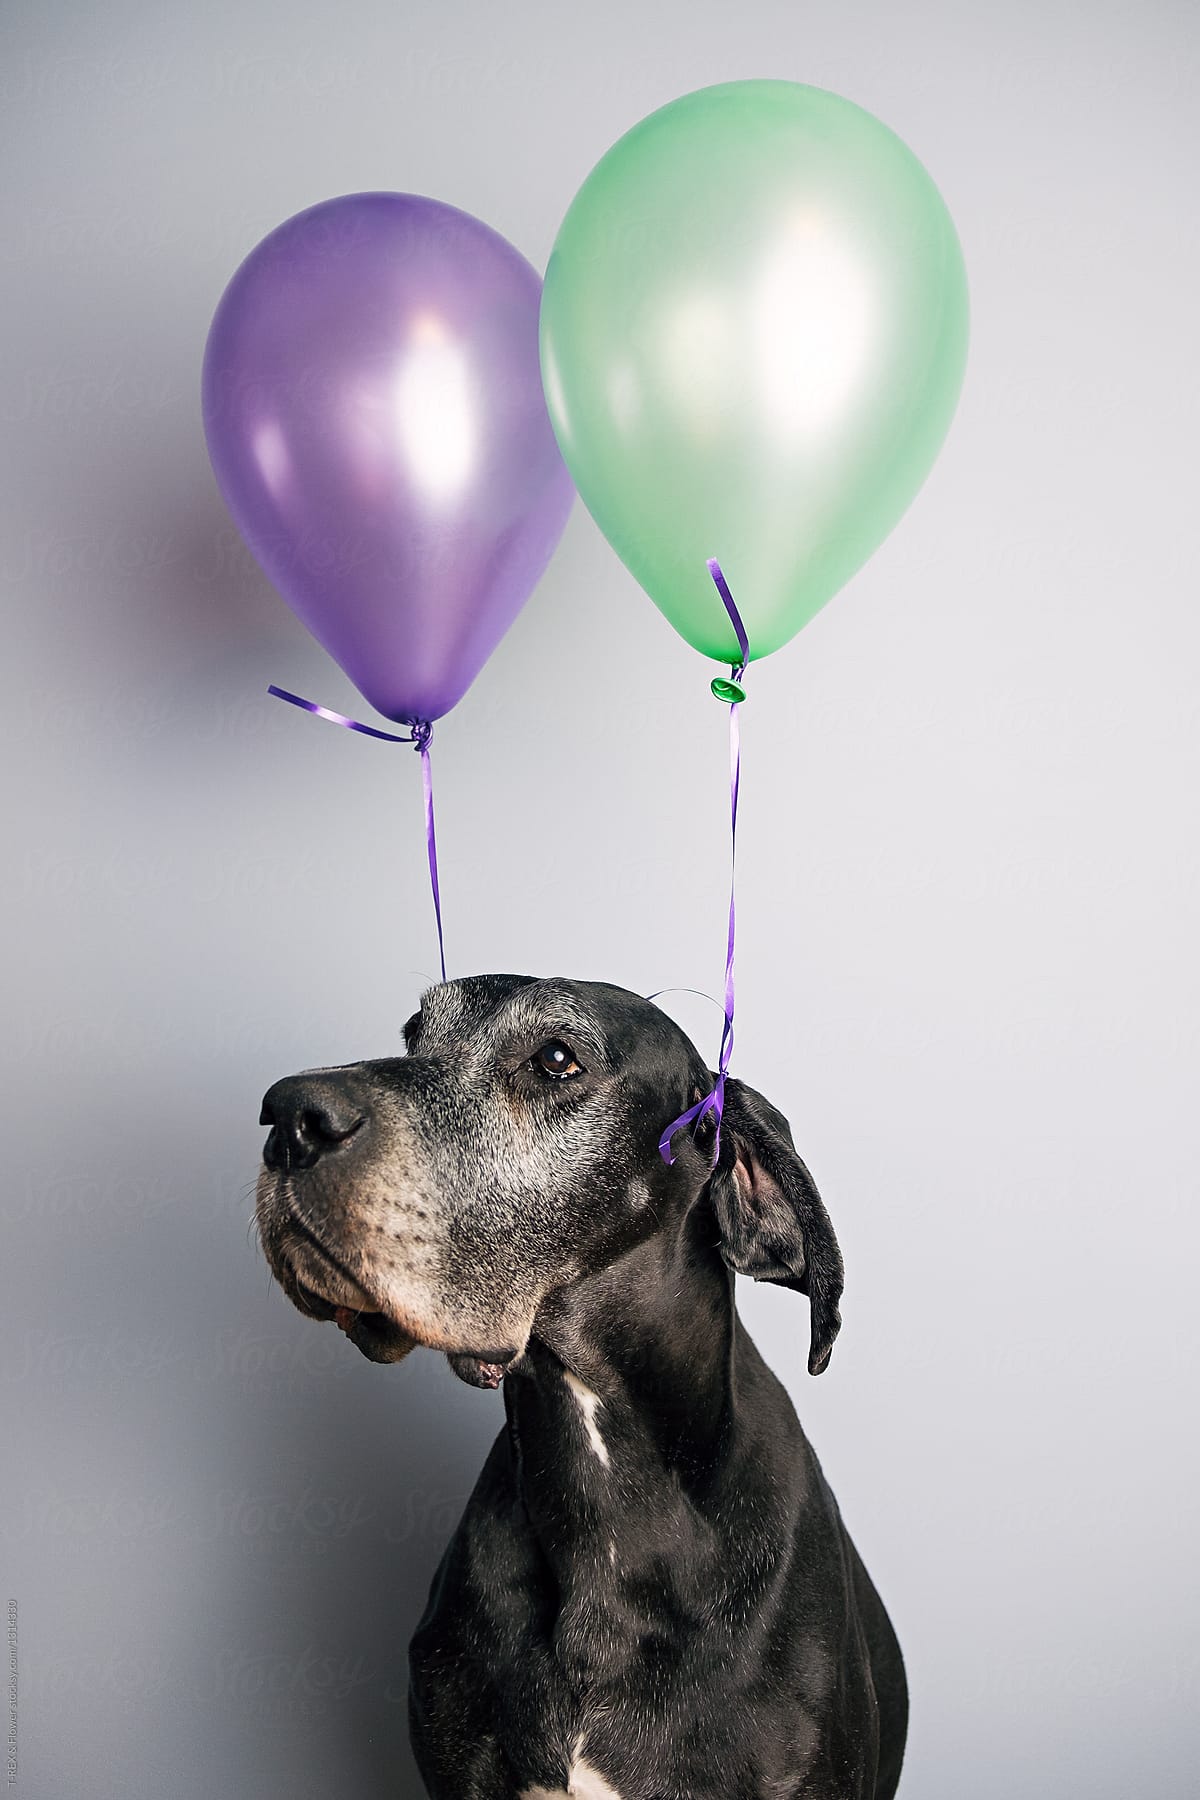 A dog with balloons on the ears